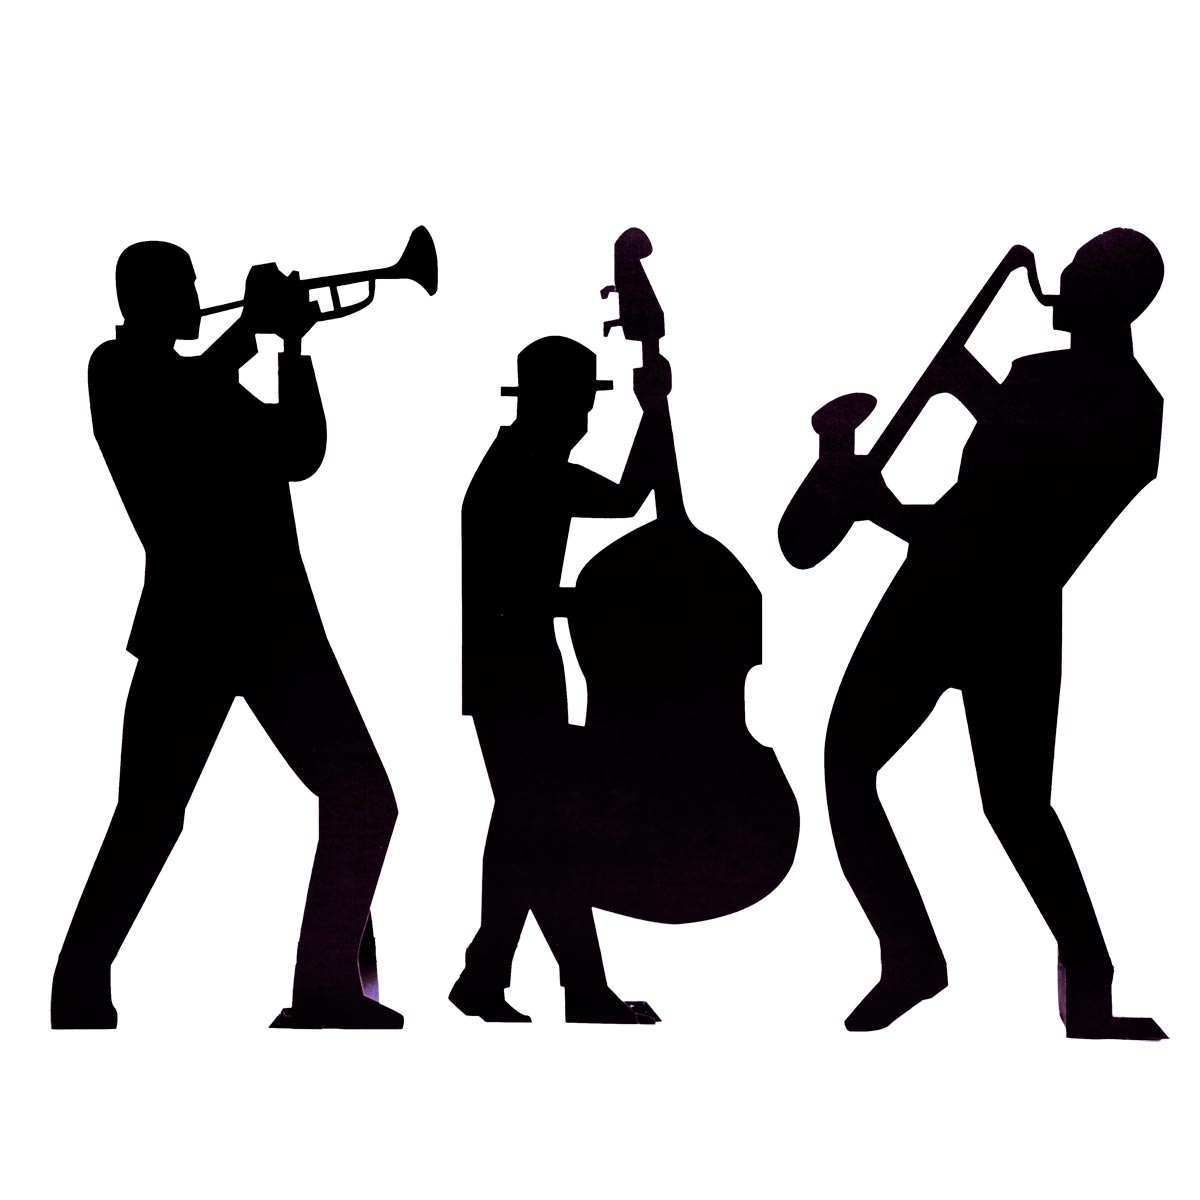 Band Related Keywords Hd Image Clipart